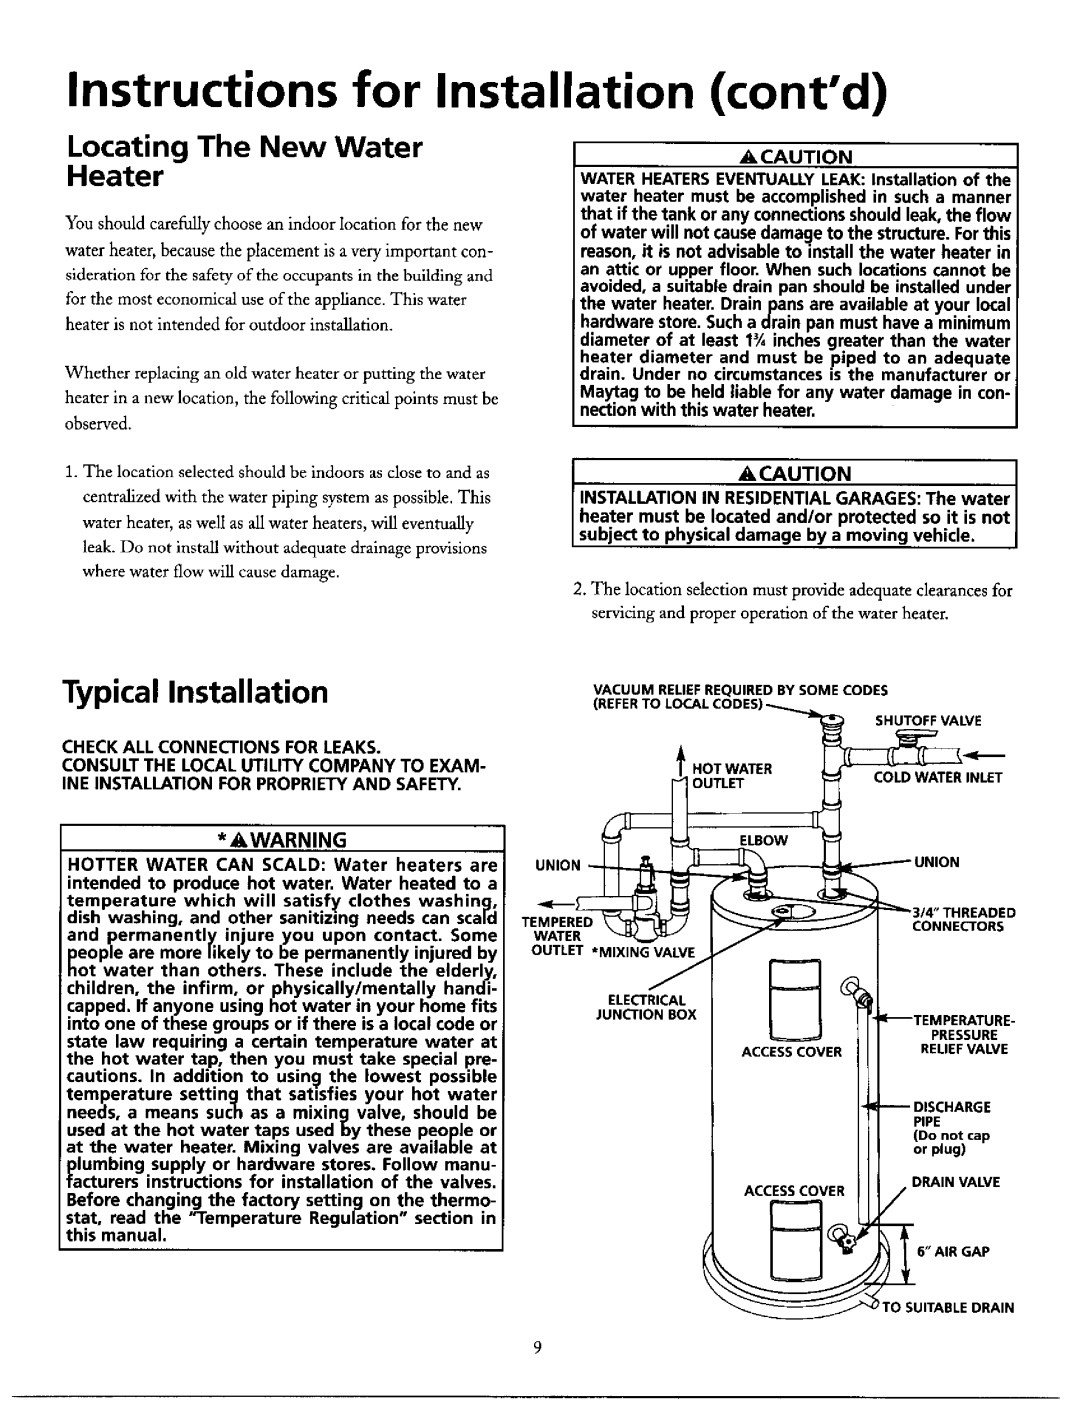 Maytag HE2940L Instructions for Installation contd, Locating The New Water, Heater, Acaution, Typical Installation, Elbow 